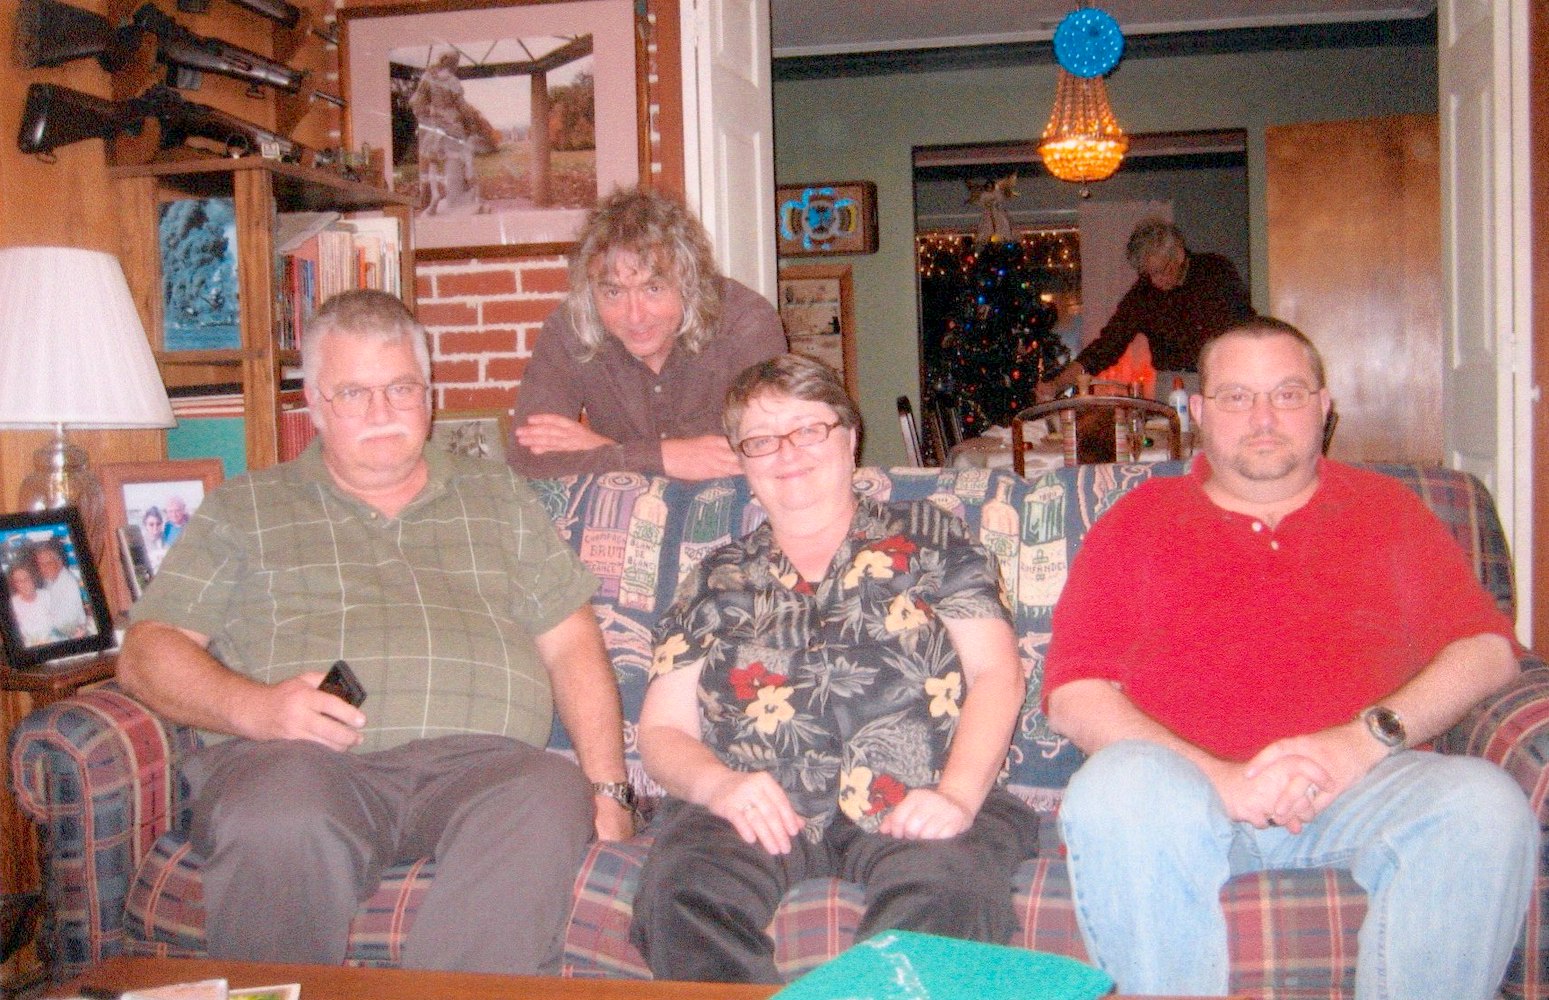 Kathie Hiers and her brothers Tommy, Mike, and Charles Hiers. Photo courtesy of Kathie Hiers.